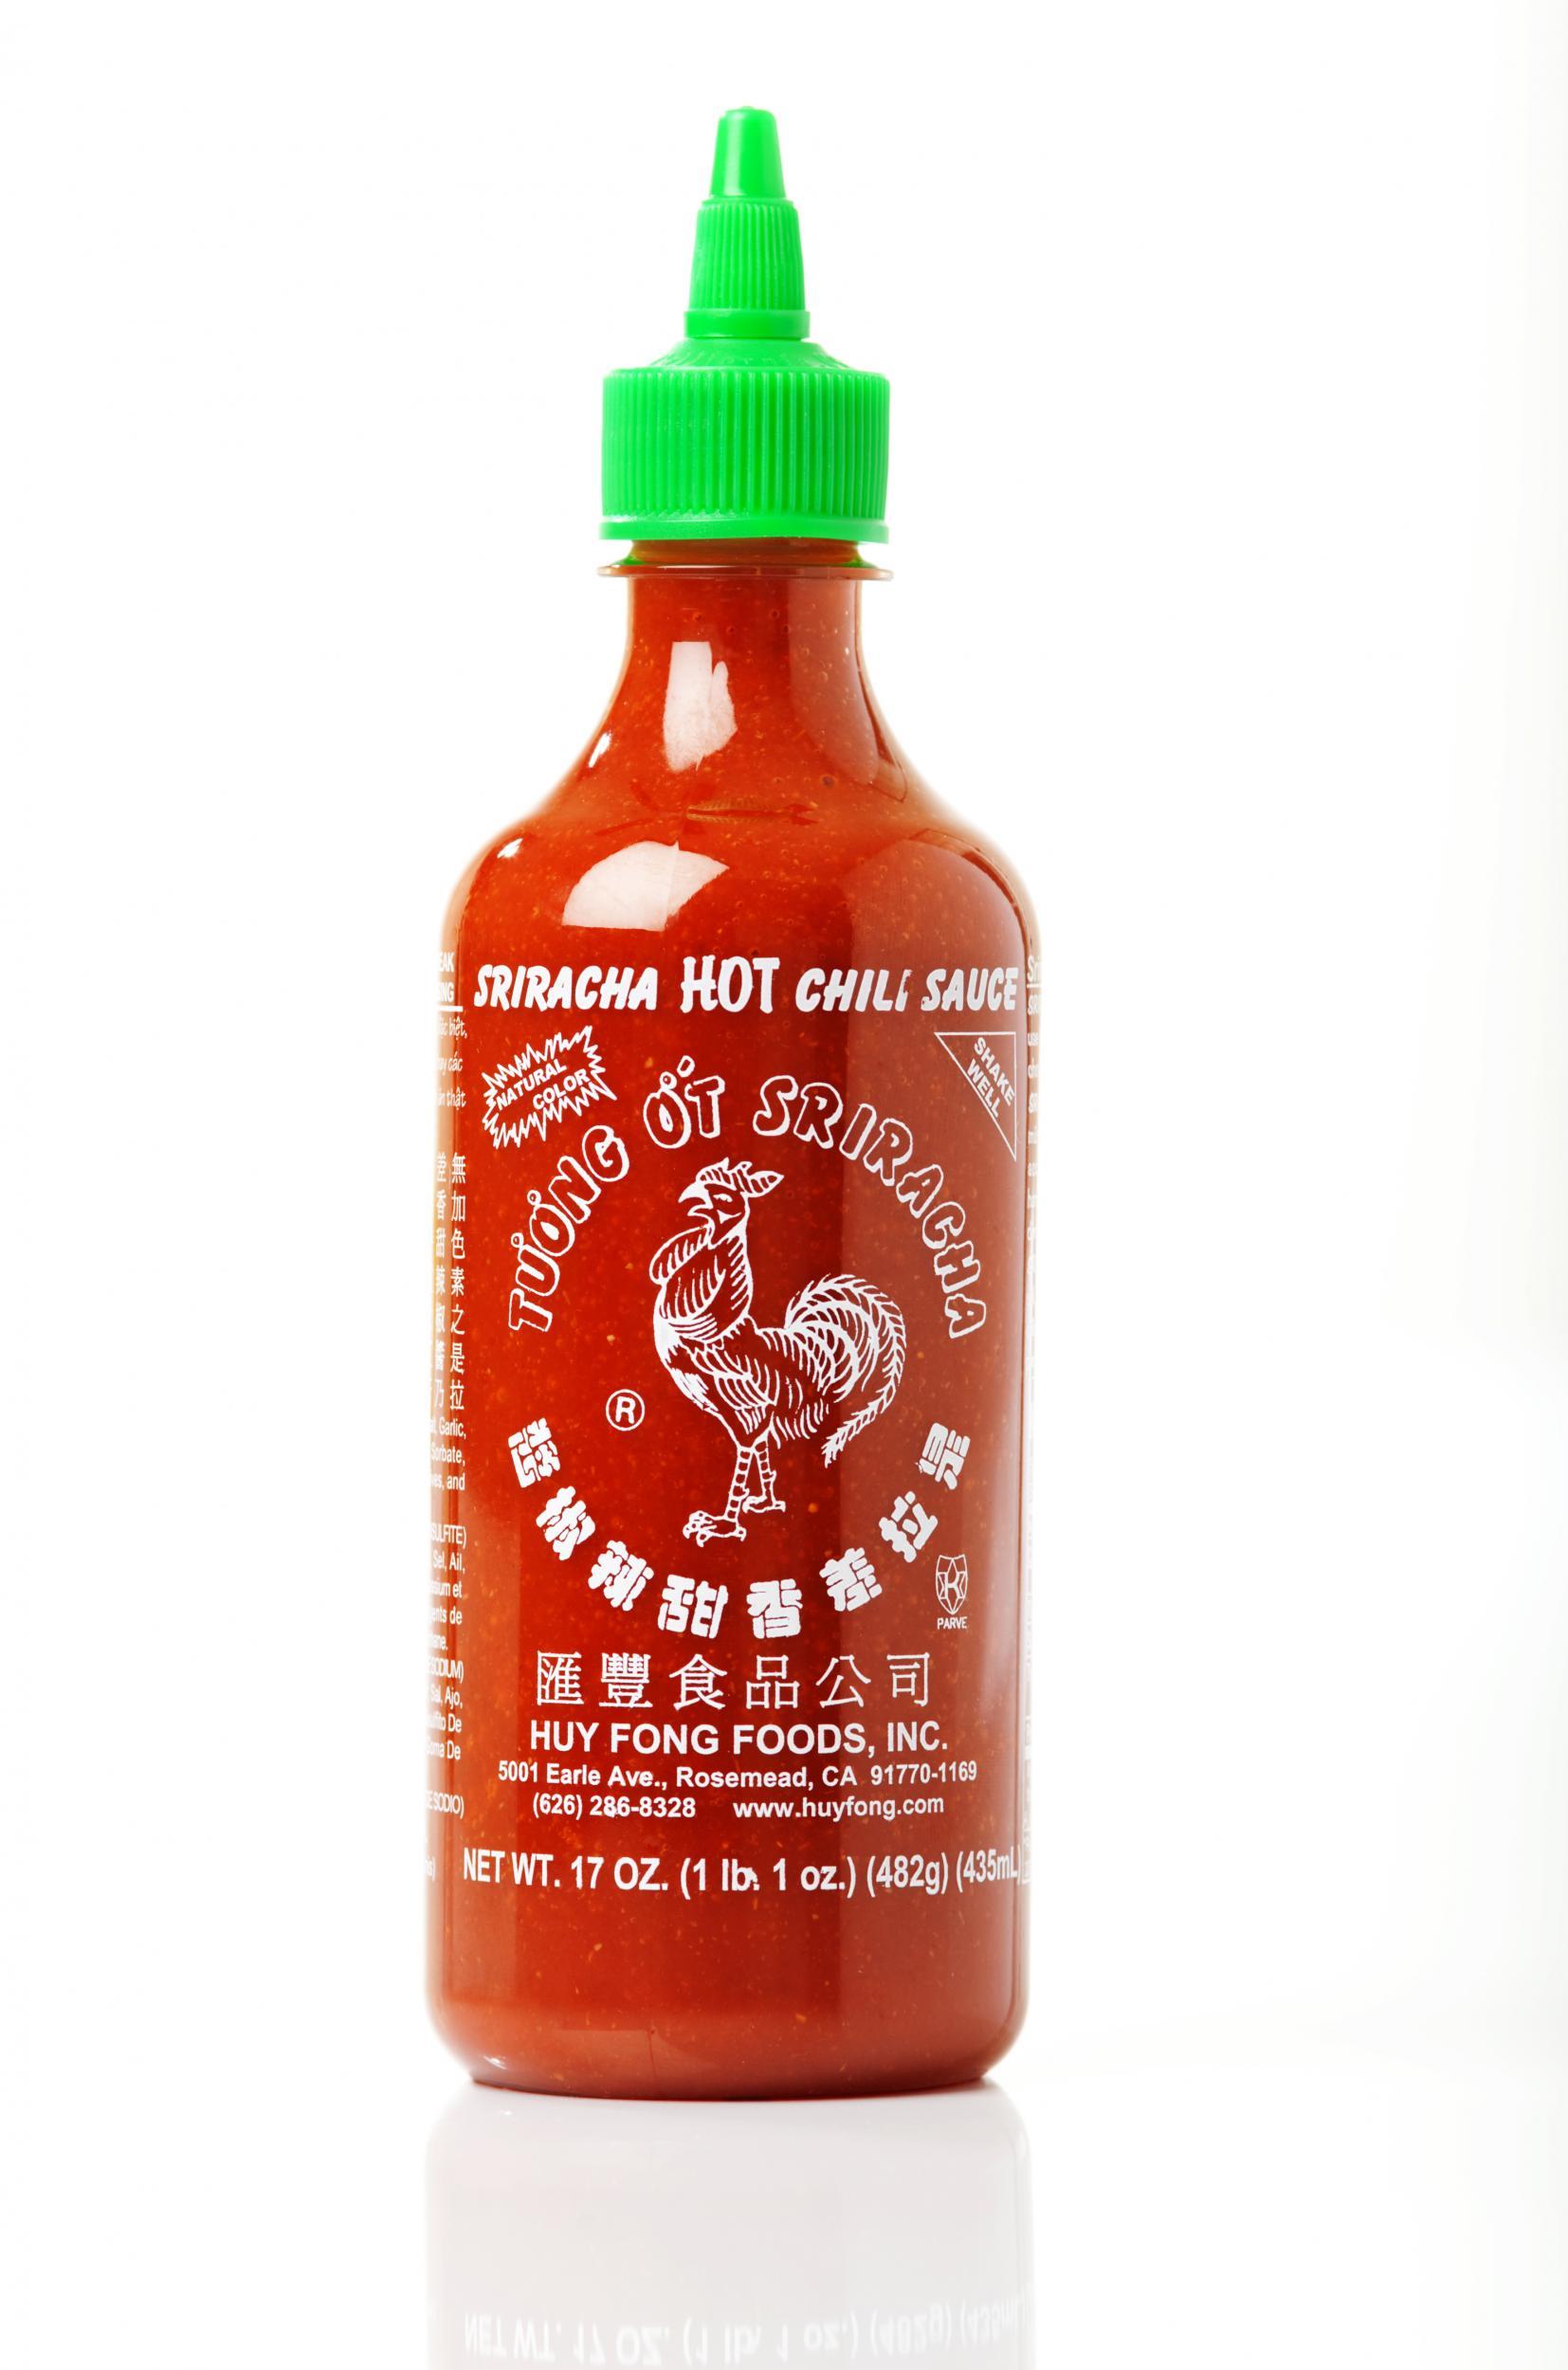 Dispute over sriracha sauce requires police intervention